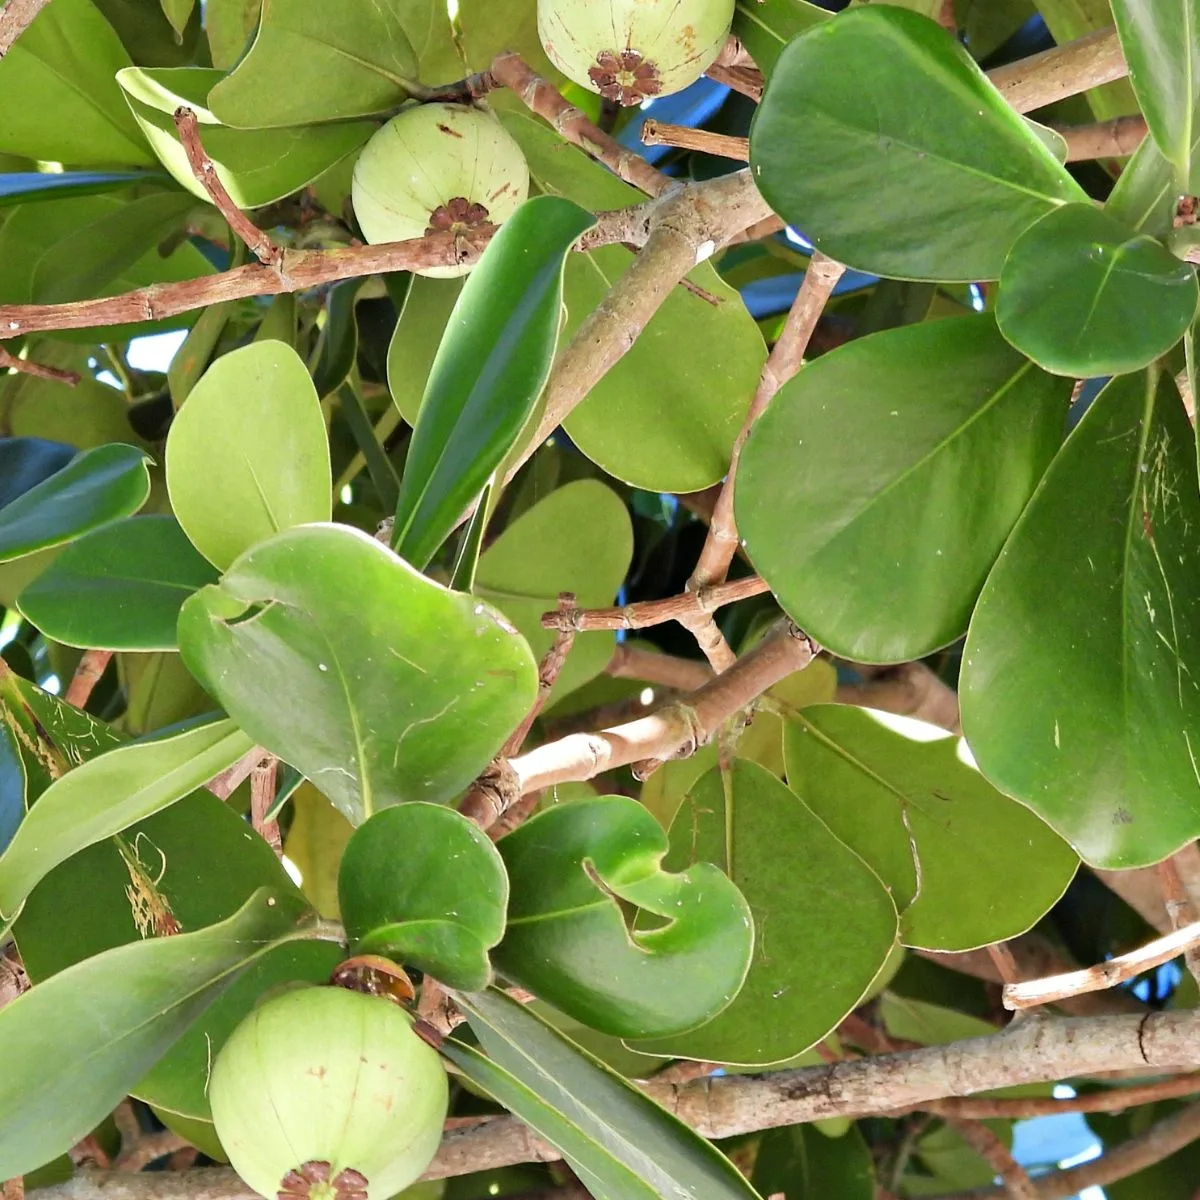 autograph tree with fruit